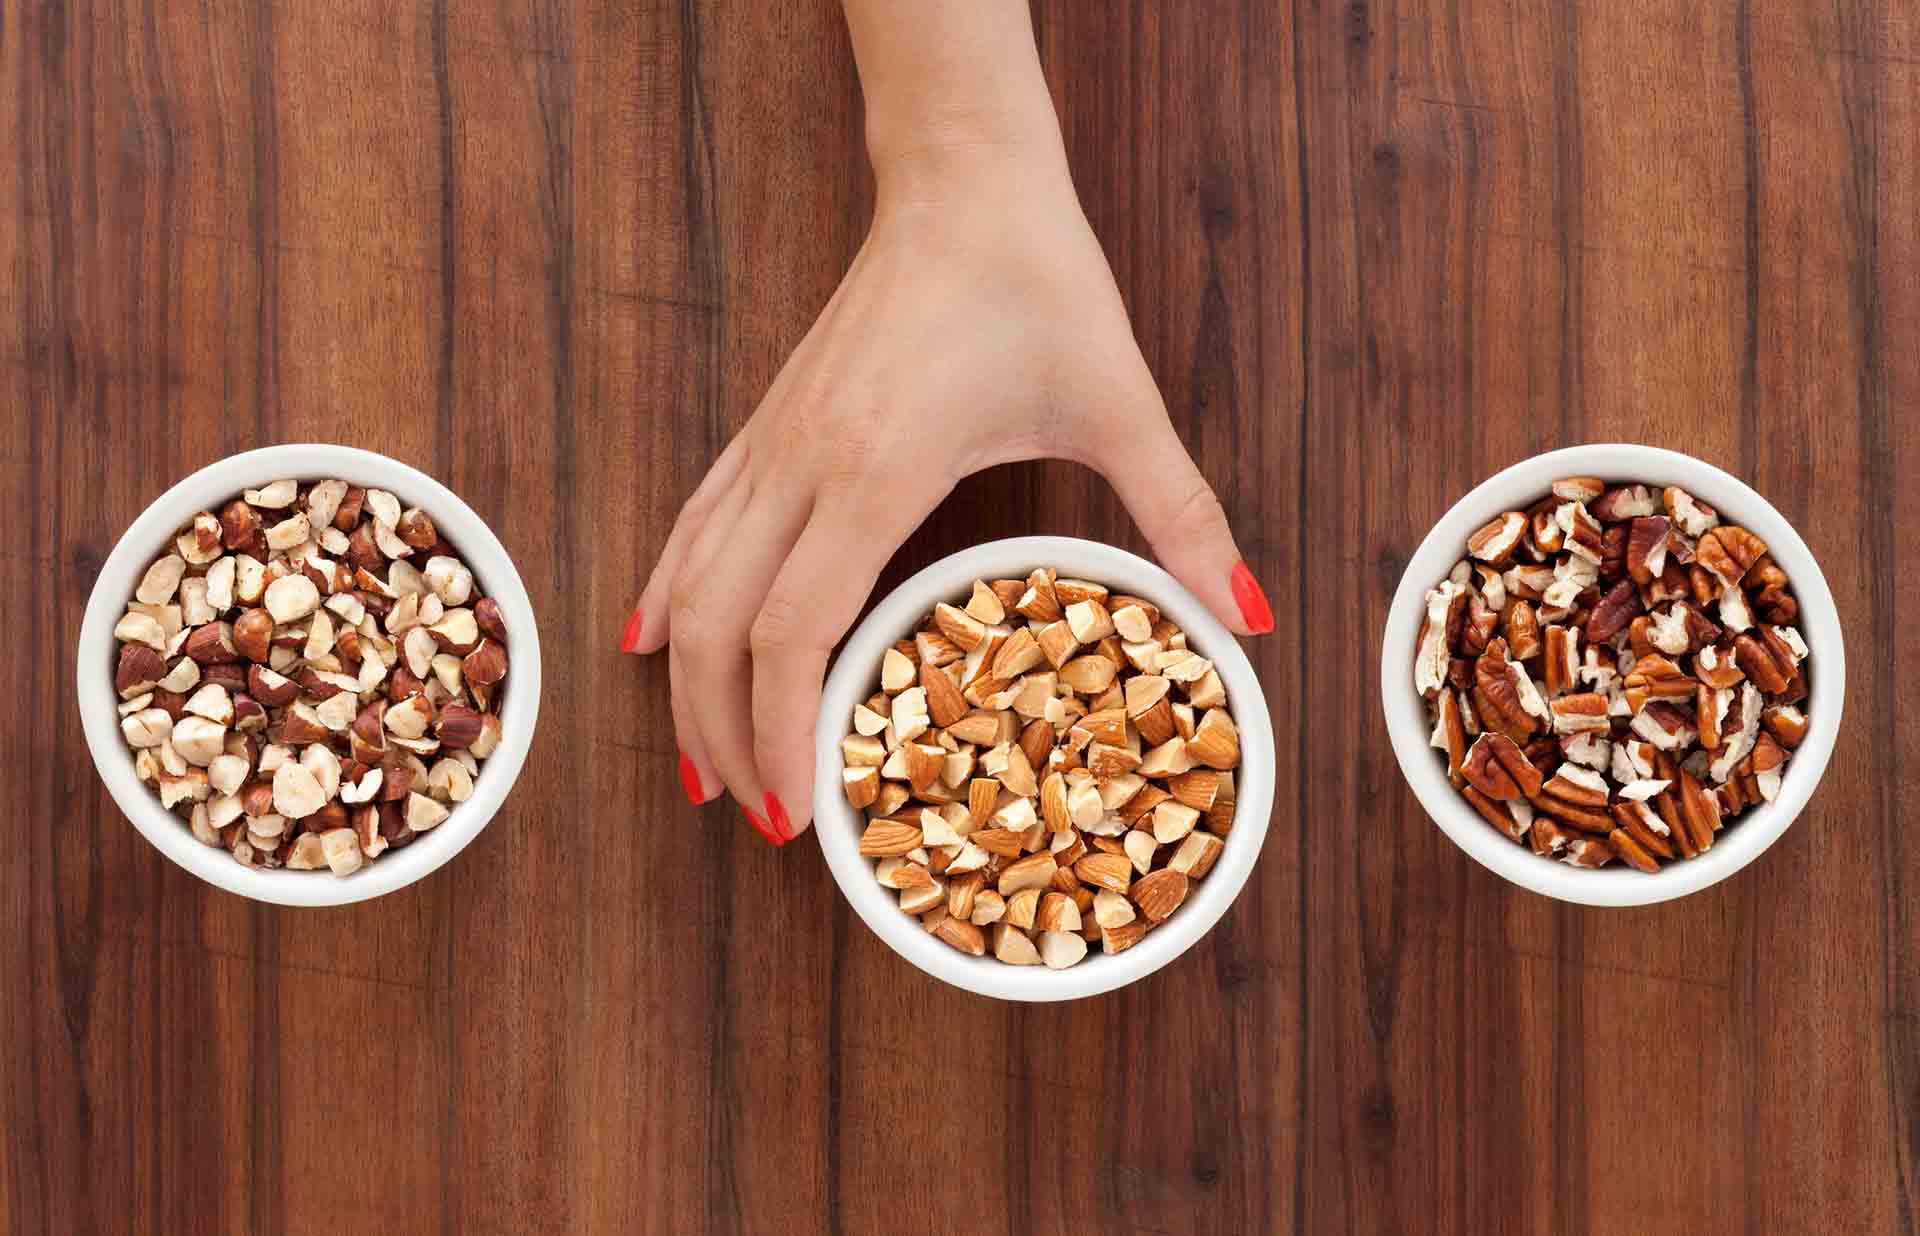 Three bowls with varieties of chopped nuts and woman's hand holding the middle one